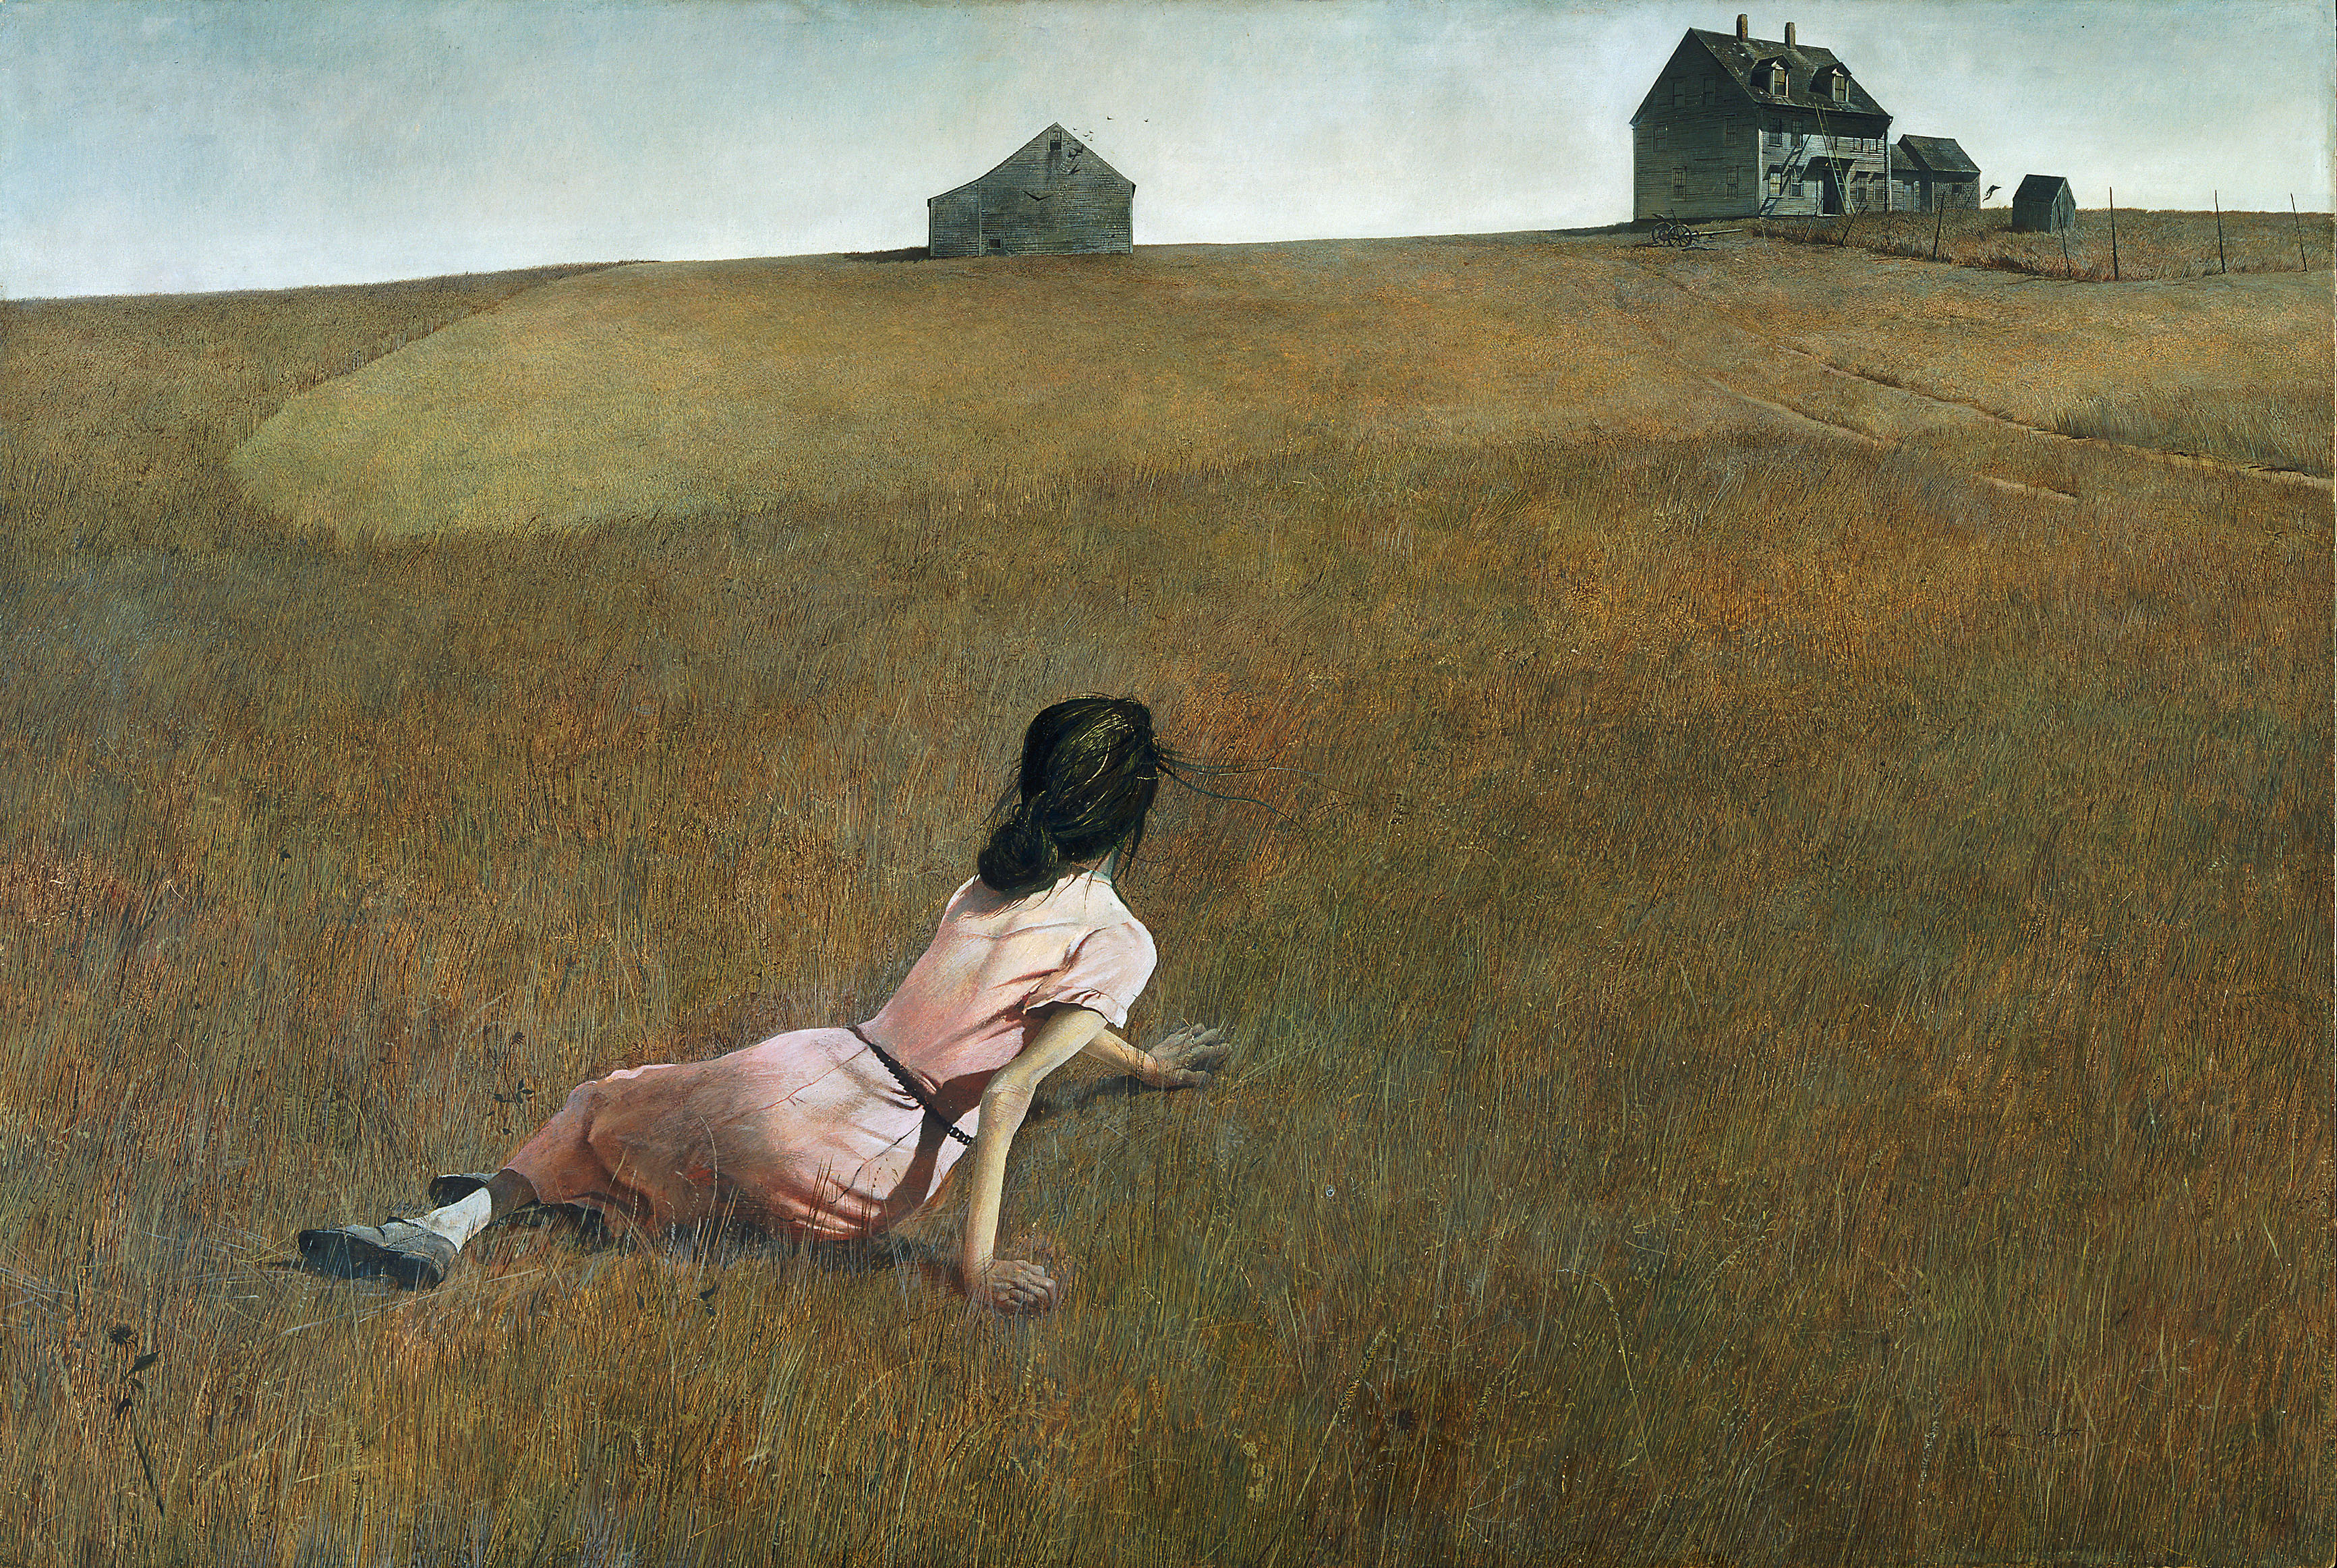 A painting of a girl in a pink dress laying in a open meadow with a farm house and home in the distance.